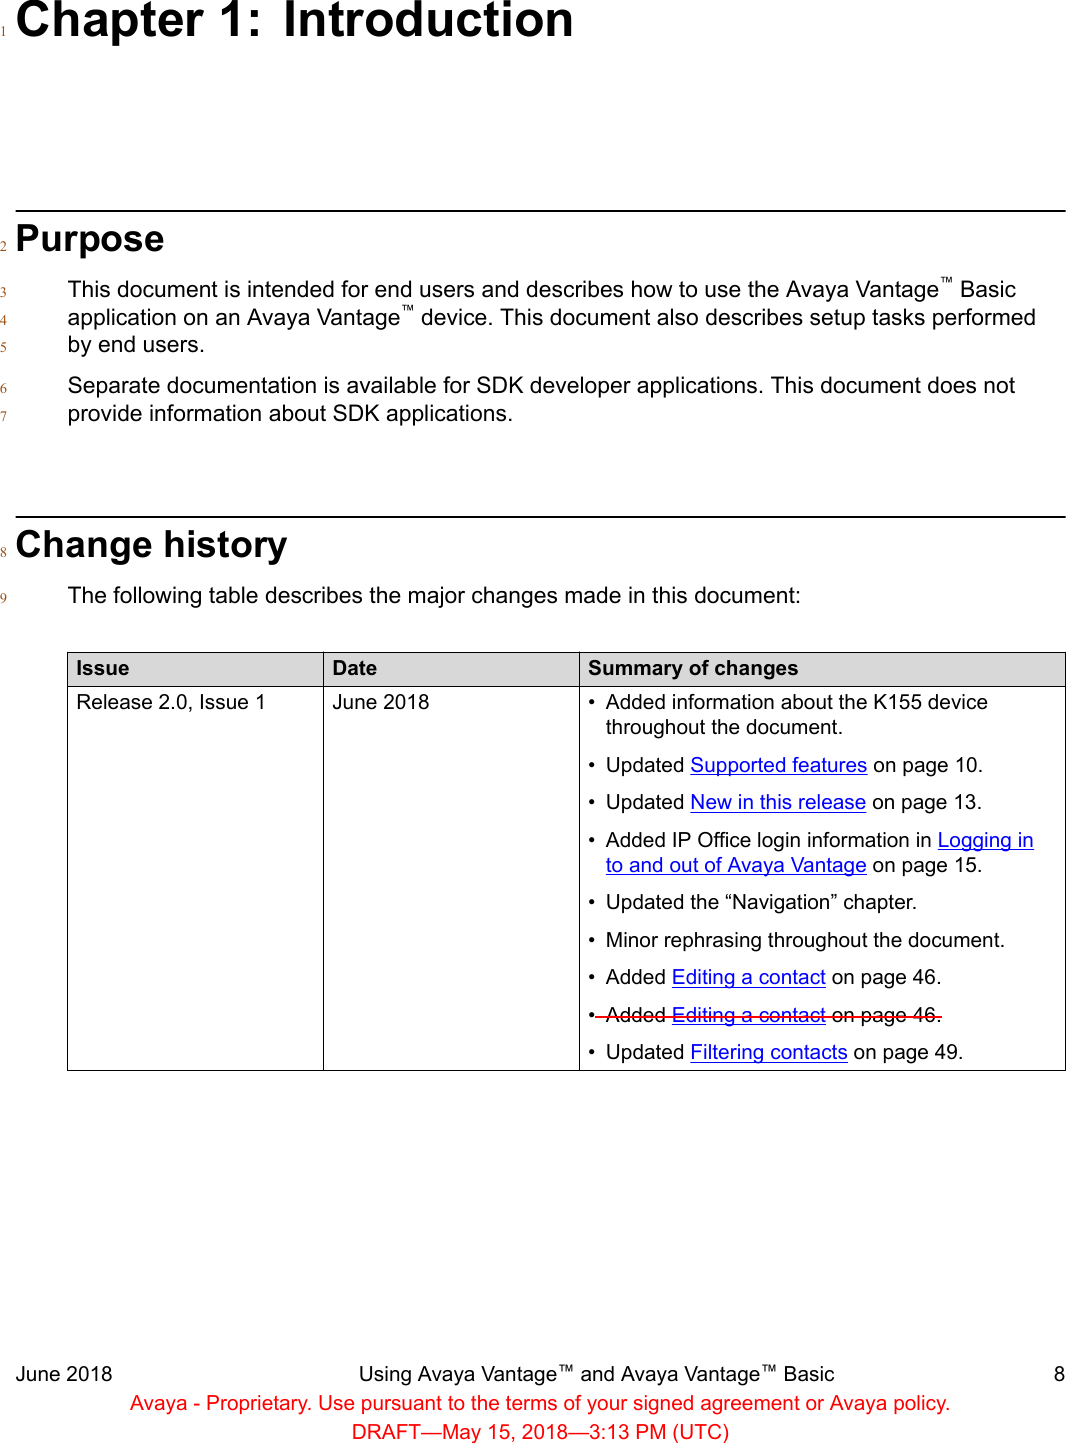 Chapter 1: Introduction1Purpose2This document is intended for end users and describes how to use the Avaya Vantage™ Basic3application on an Avaya Vantage™ device. This document also describes setup tasks performed4by end users.5Separate documentation is available for SDK developer applications. This document does not6provide information about SDK applications.7Change history8The following table describes the major changes made in this document:9Issue Date Summary of changesRelease 2.0, Issue 1 June 2018 • Added information about the K155 devicethroughout the document.•Updated Supported features on page 10.• Updated New in this release on page 13.• Added IP Office login information in Logging into and out of Avaya Vantage on page 15.•Updated the “Navigation” chapter.• Minor rephrasing throughout the document.• Added Editing a contact on page 46.• Added Editing a contact on page 46.• Updated Filtering contacts on page 49.June 2018 Using Avaya Vantage™ and Avaya Vantage™ Basic 8Avaya - Proprietary. Use pursuant to the terms of your signed agreement or Avaya policy.DRAFT—May 15, 2018—3:13 PM (UTC)